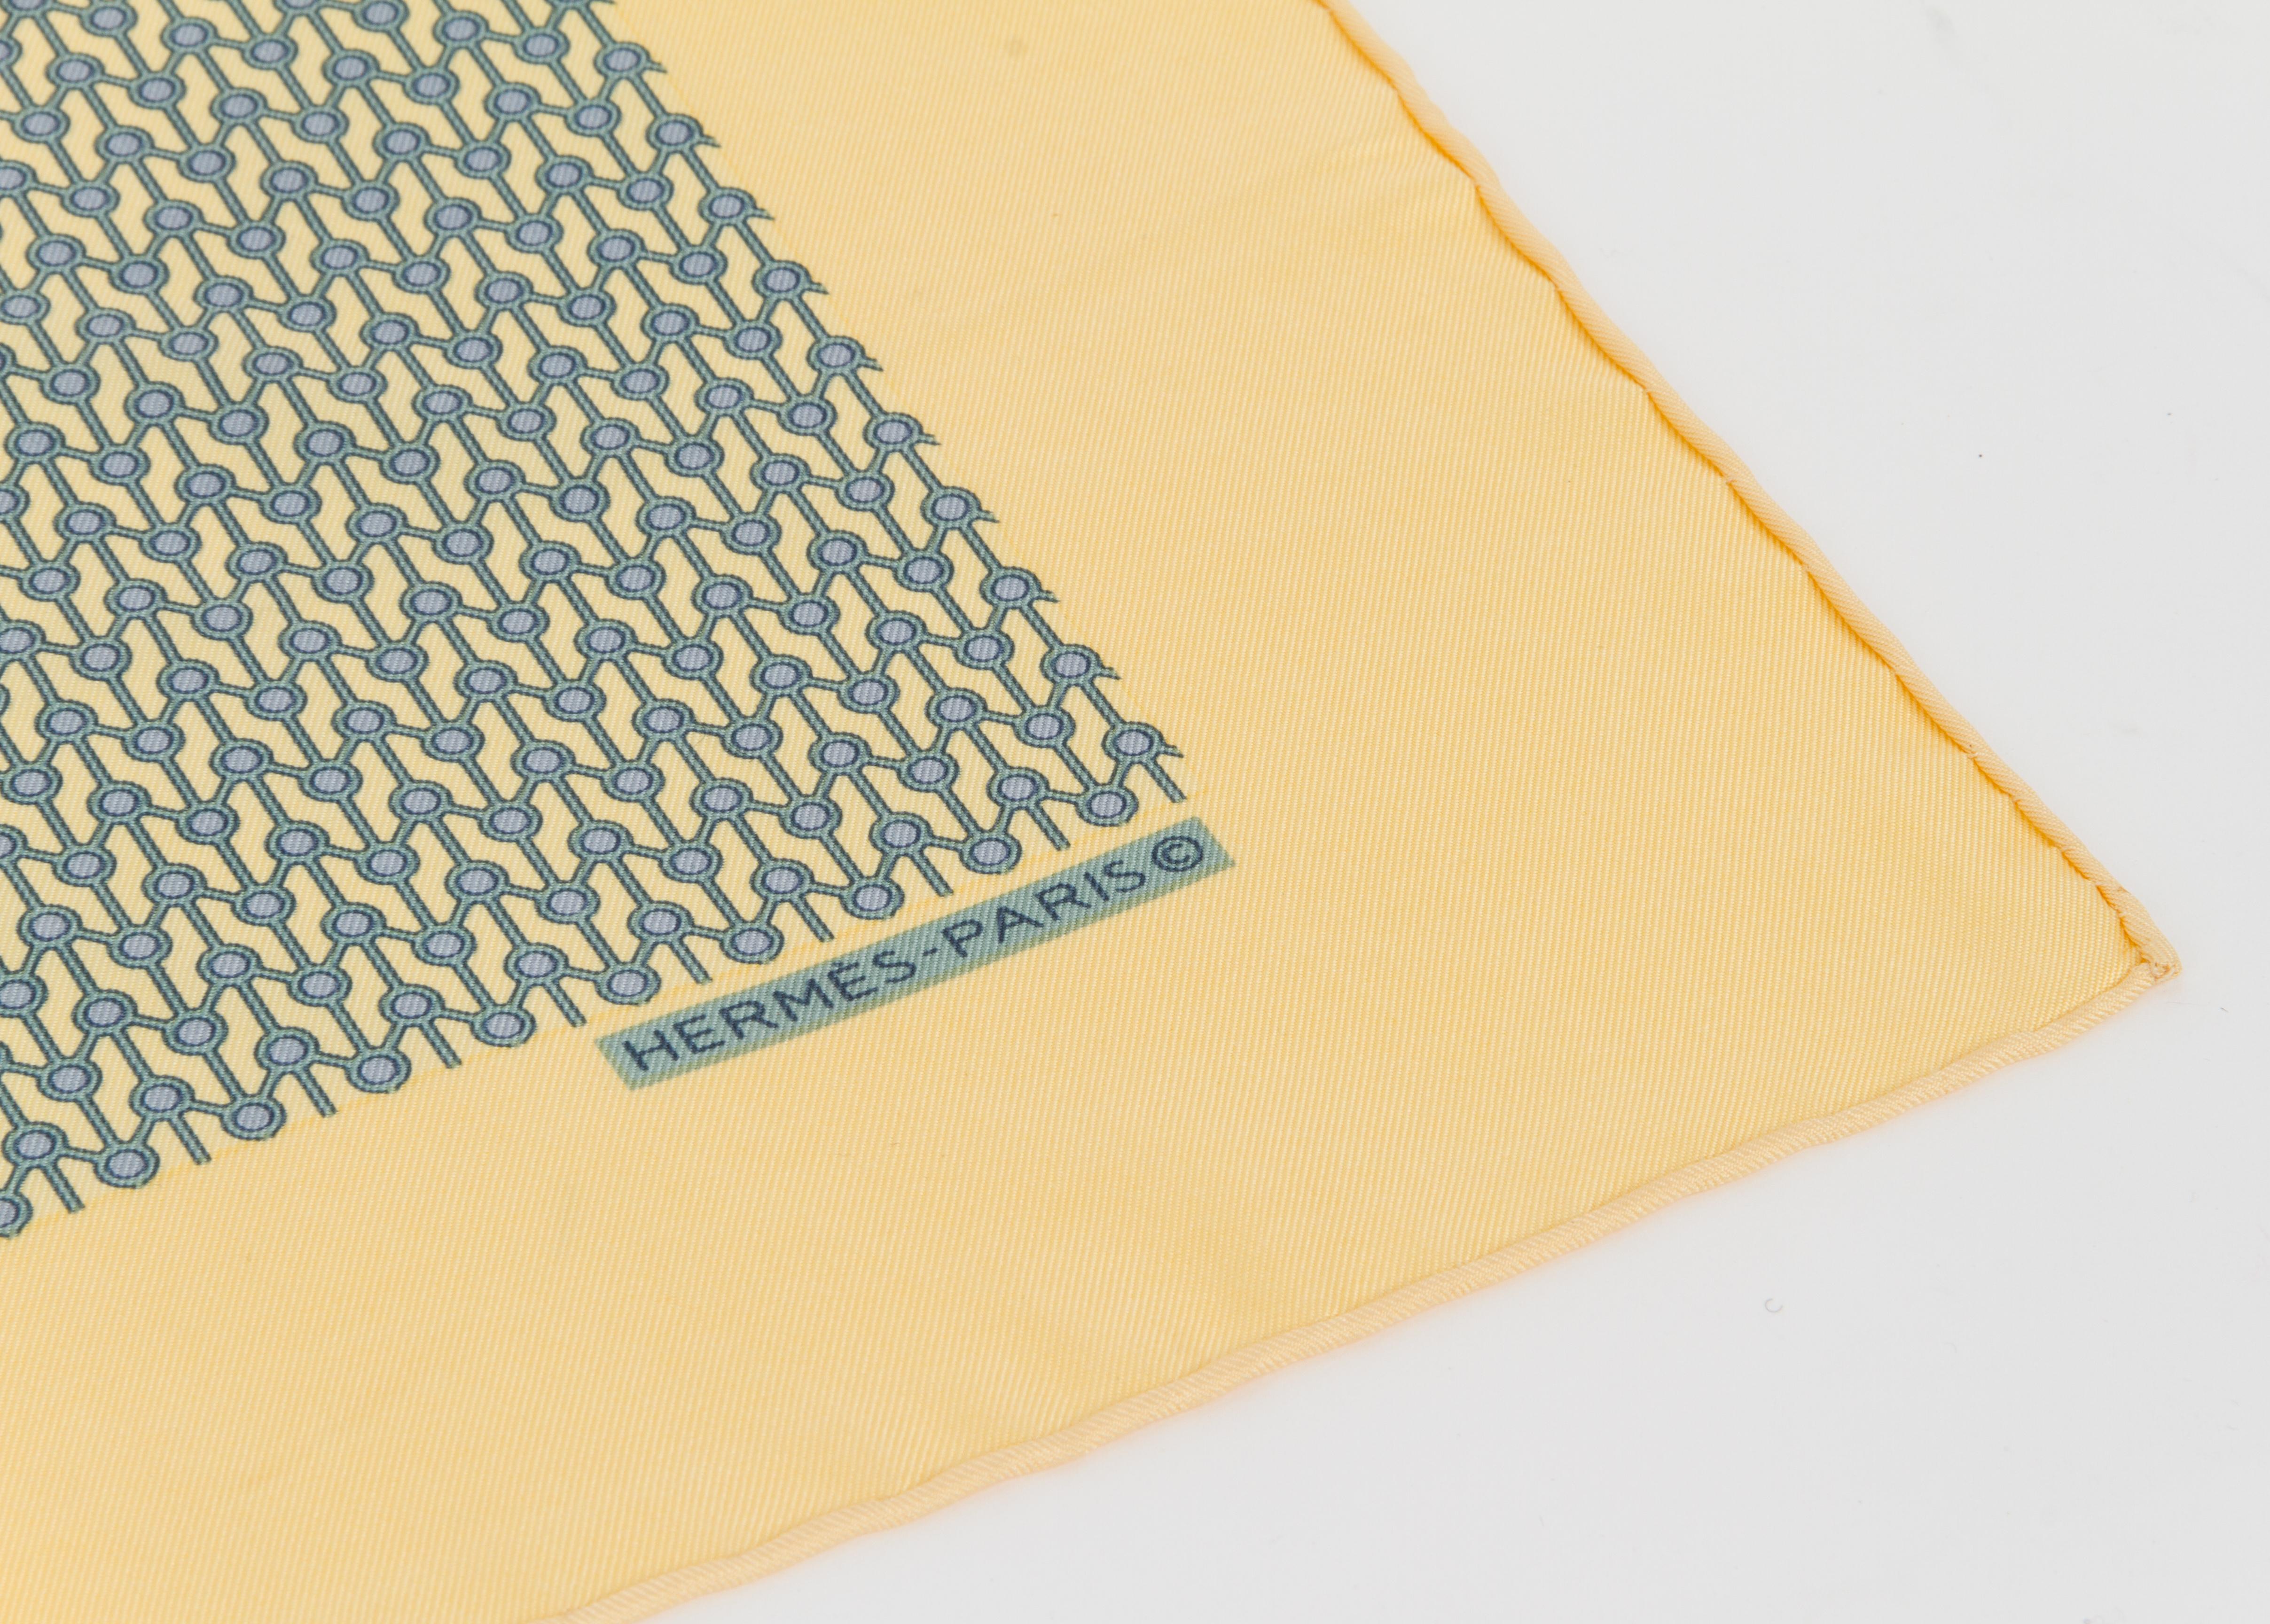 Hermès square silk pocket scarf. Geometric yellow and blue design. Hand-rolled edges.